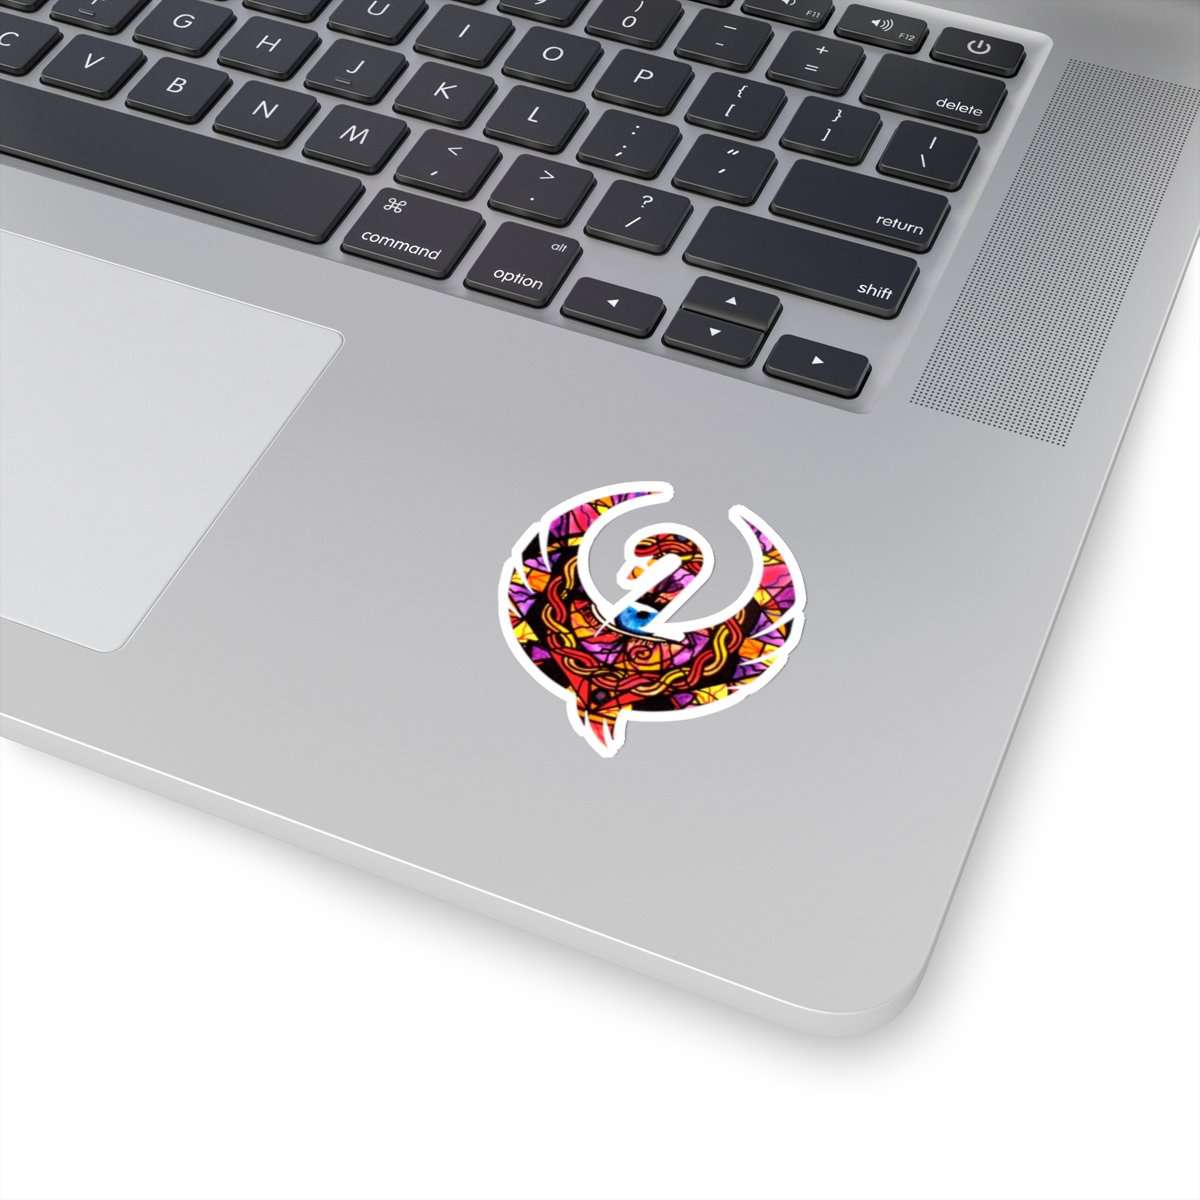 purchase-confident-self-expression-swan-stickers-hot-on-sale_3.jpg